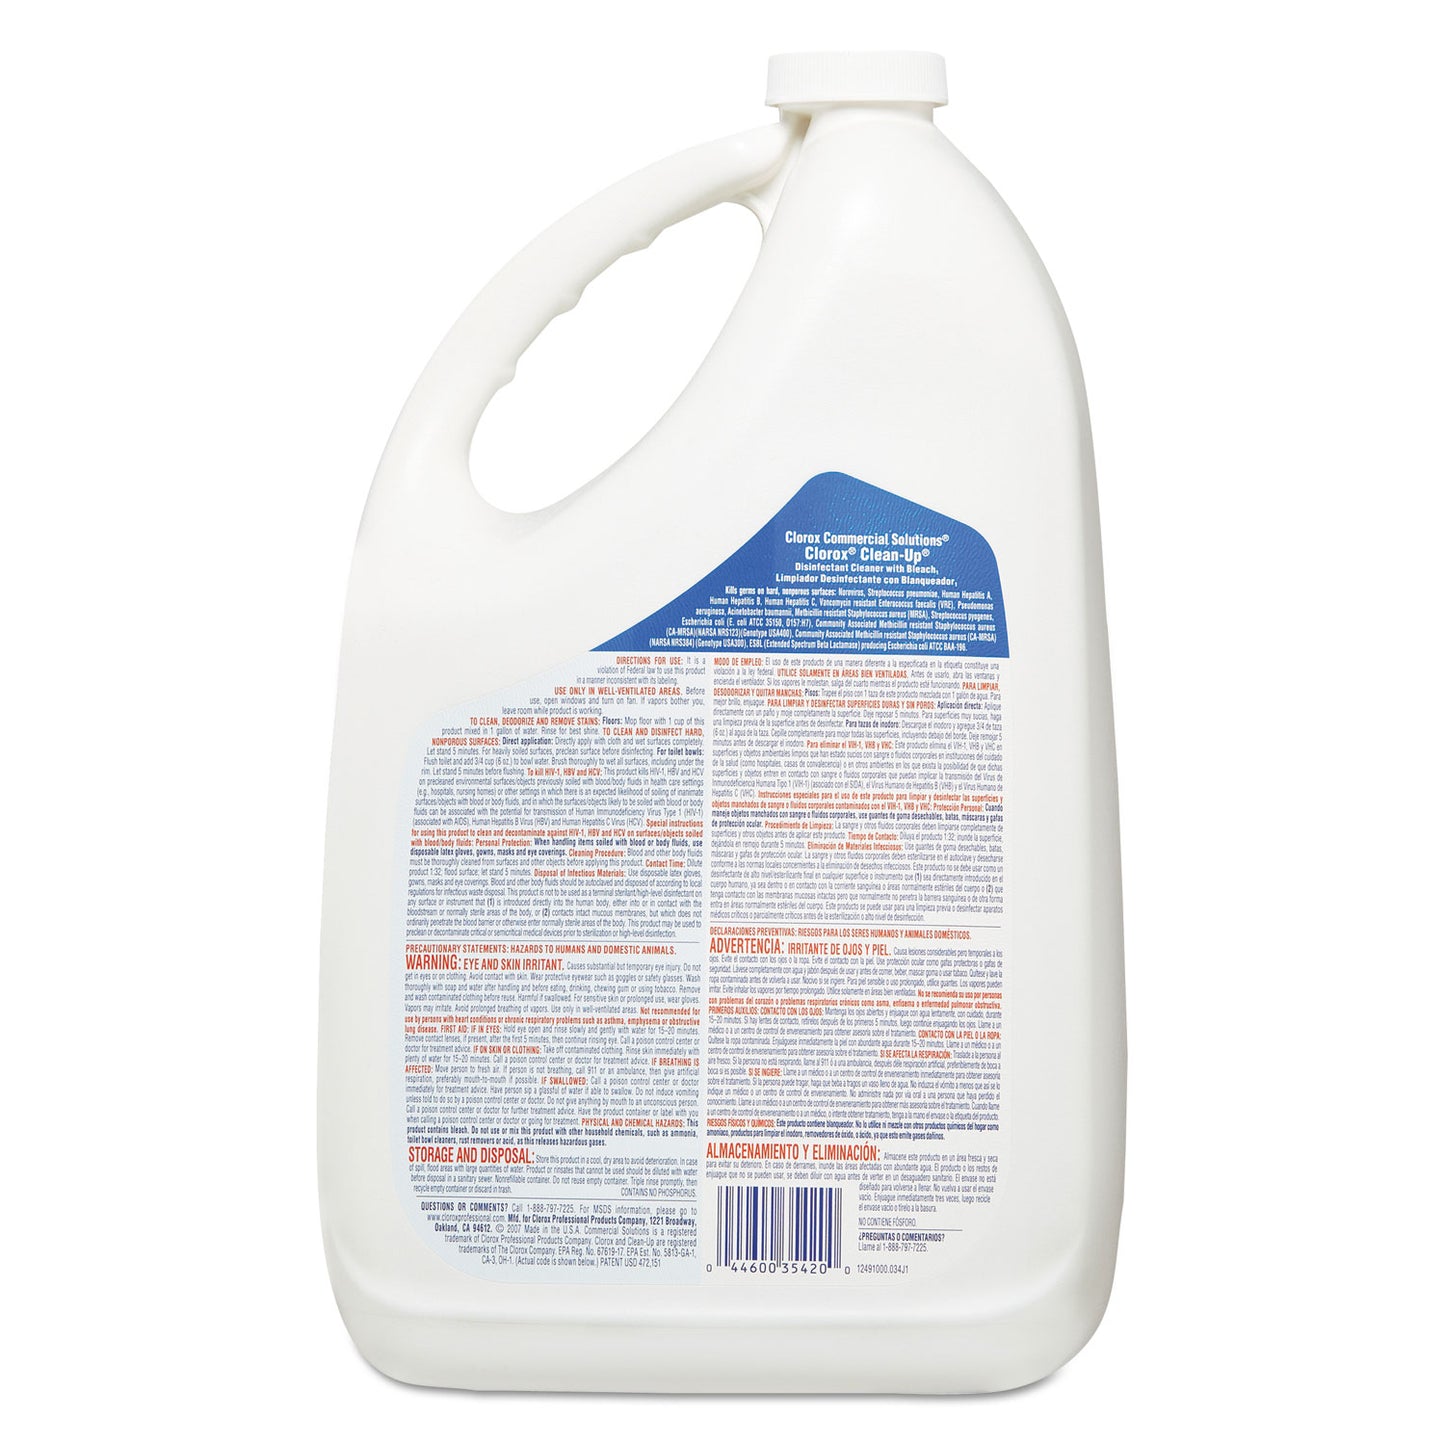 Clorox Clean-Up Disinfectant Cleaner with Bleach (1 GALLON)